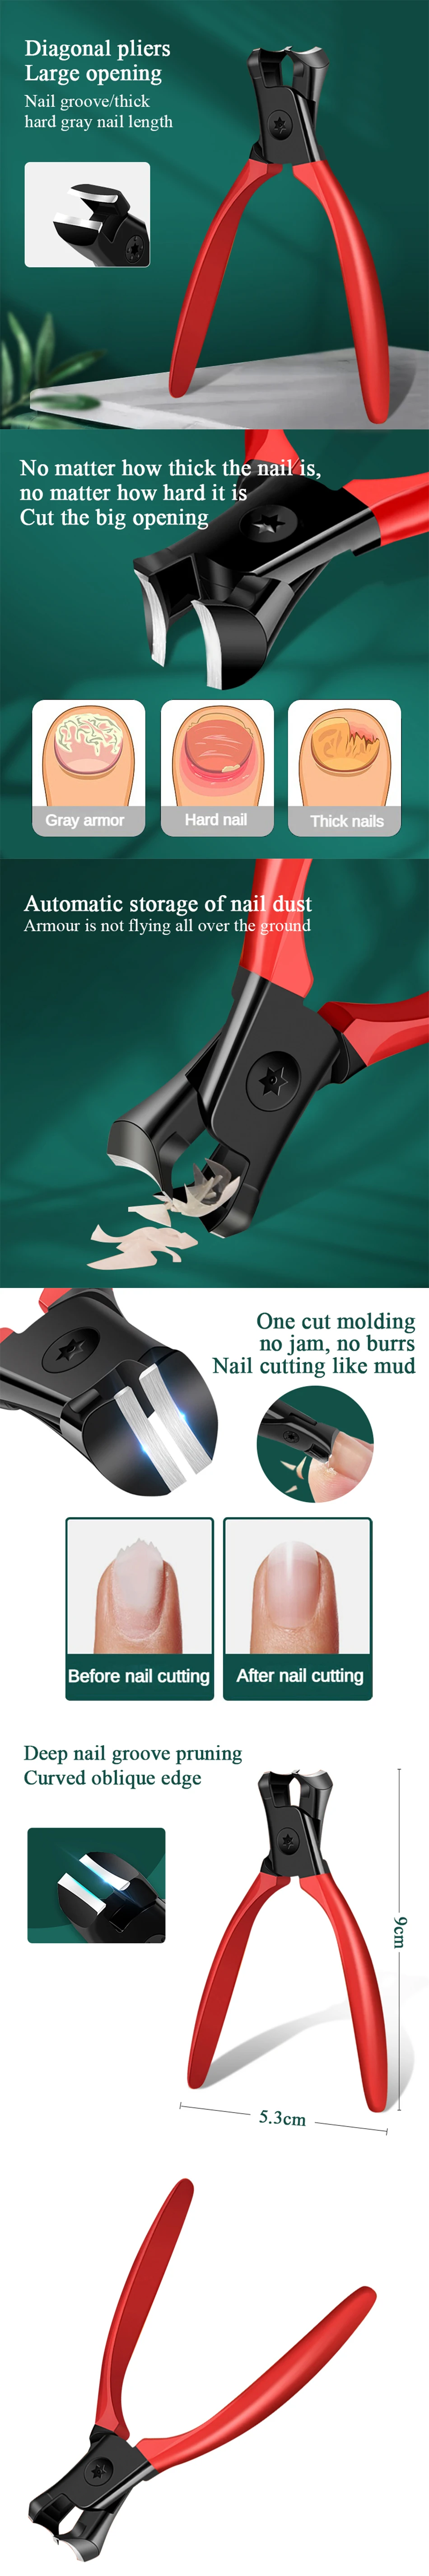 Anti-Splash Nail Clippers for Onychomycosis